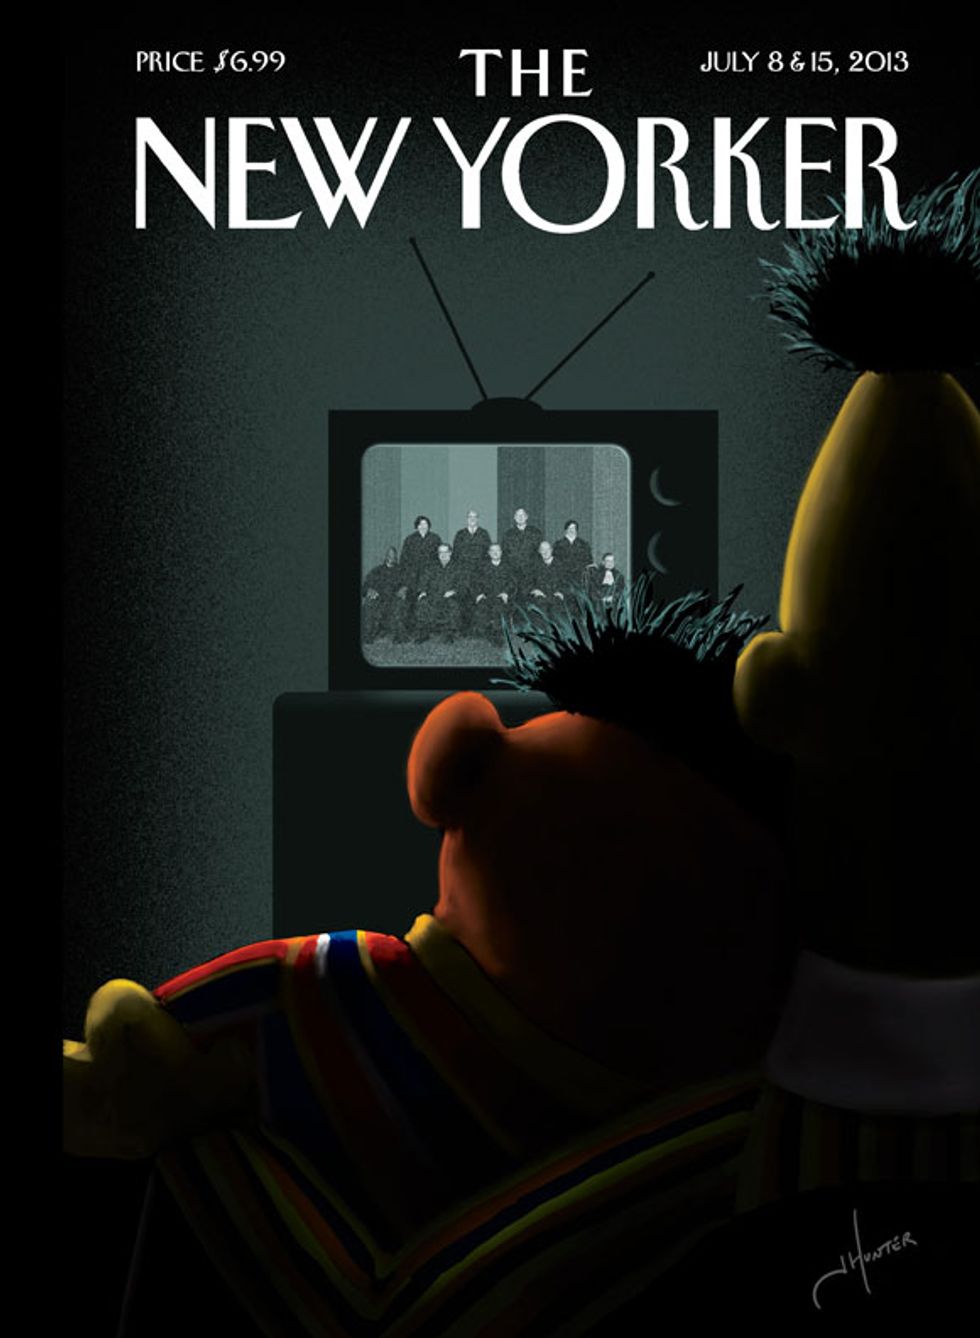 NRO's Kathryn Jean Lopez Simply Does Not Care For The New Yorker's Sodomite Muppets